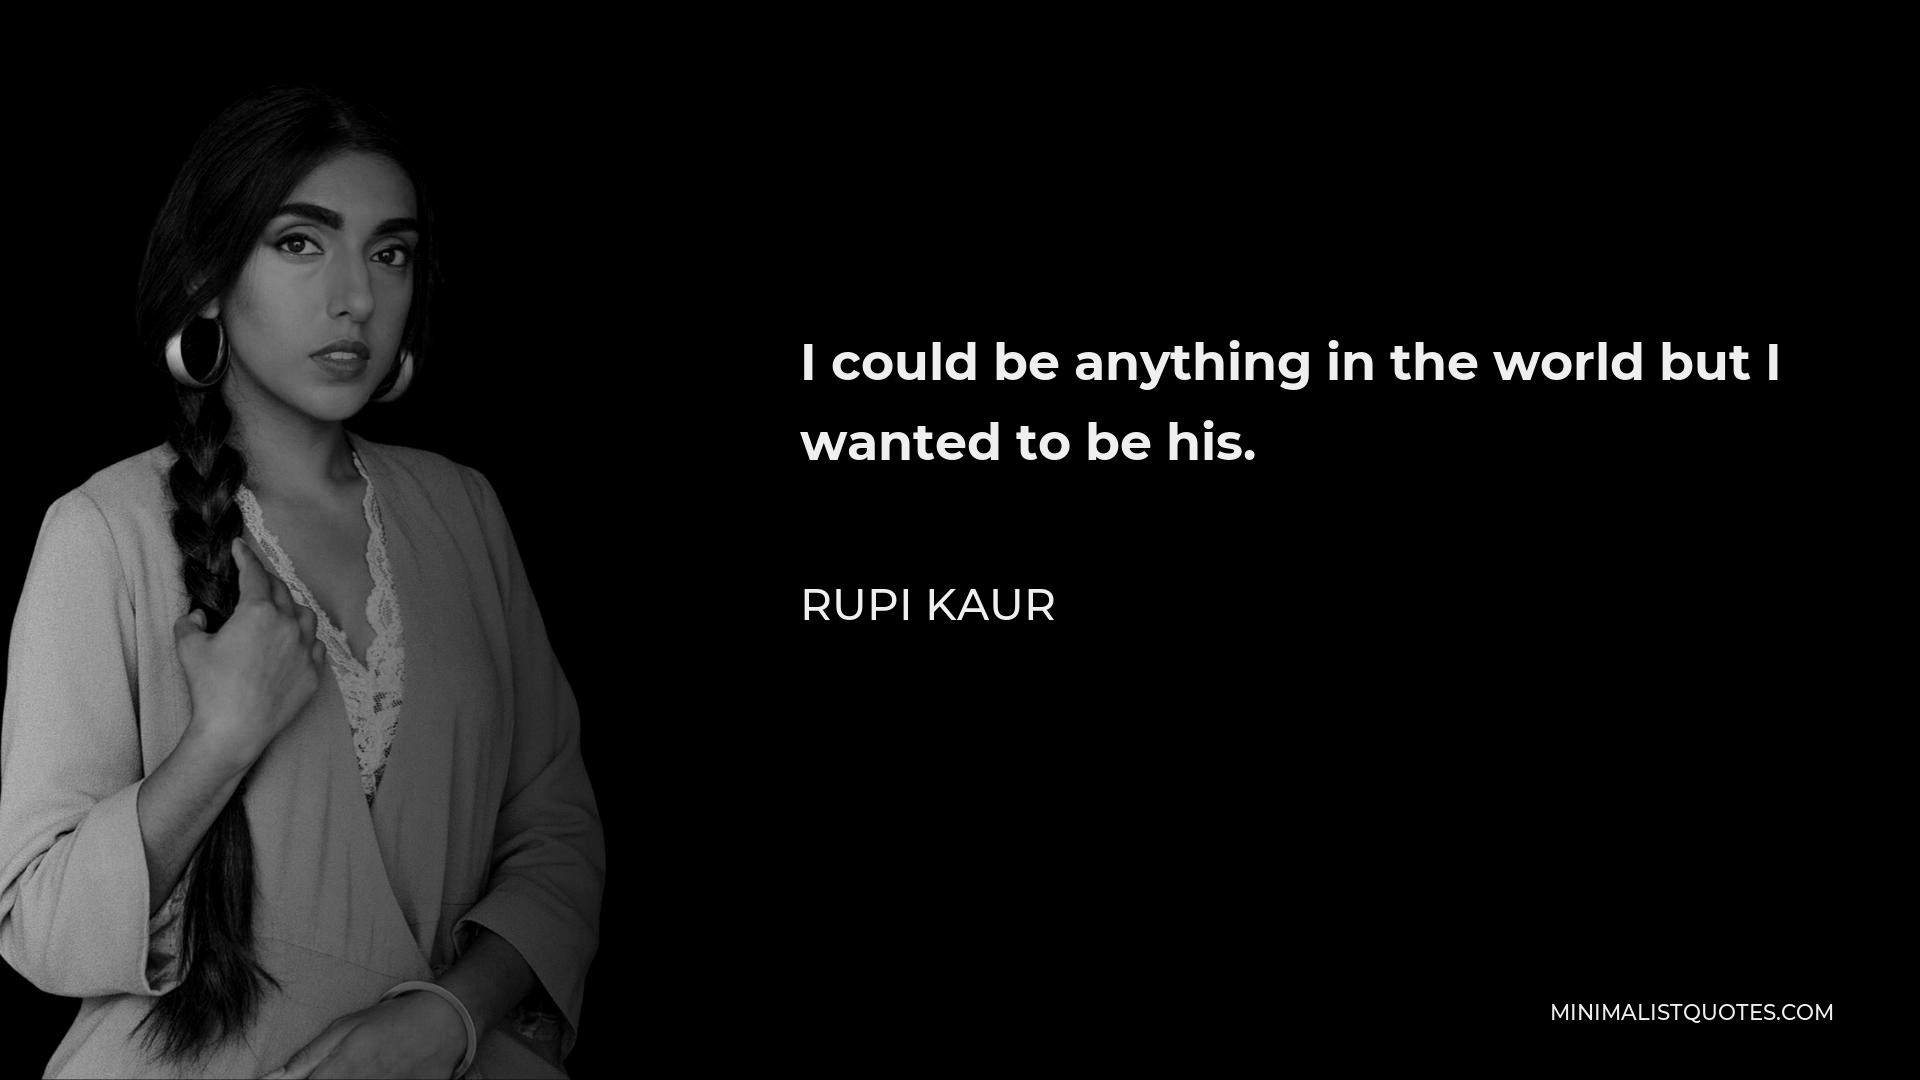 Rupi Kaur Quote - I could be anything in the world but I wanted to be his.